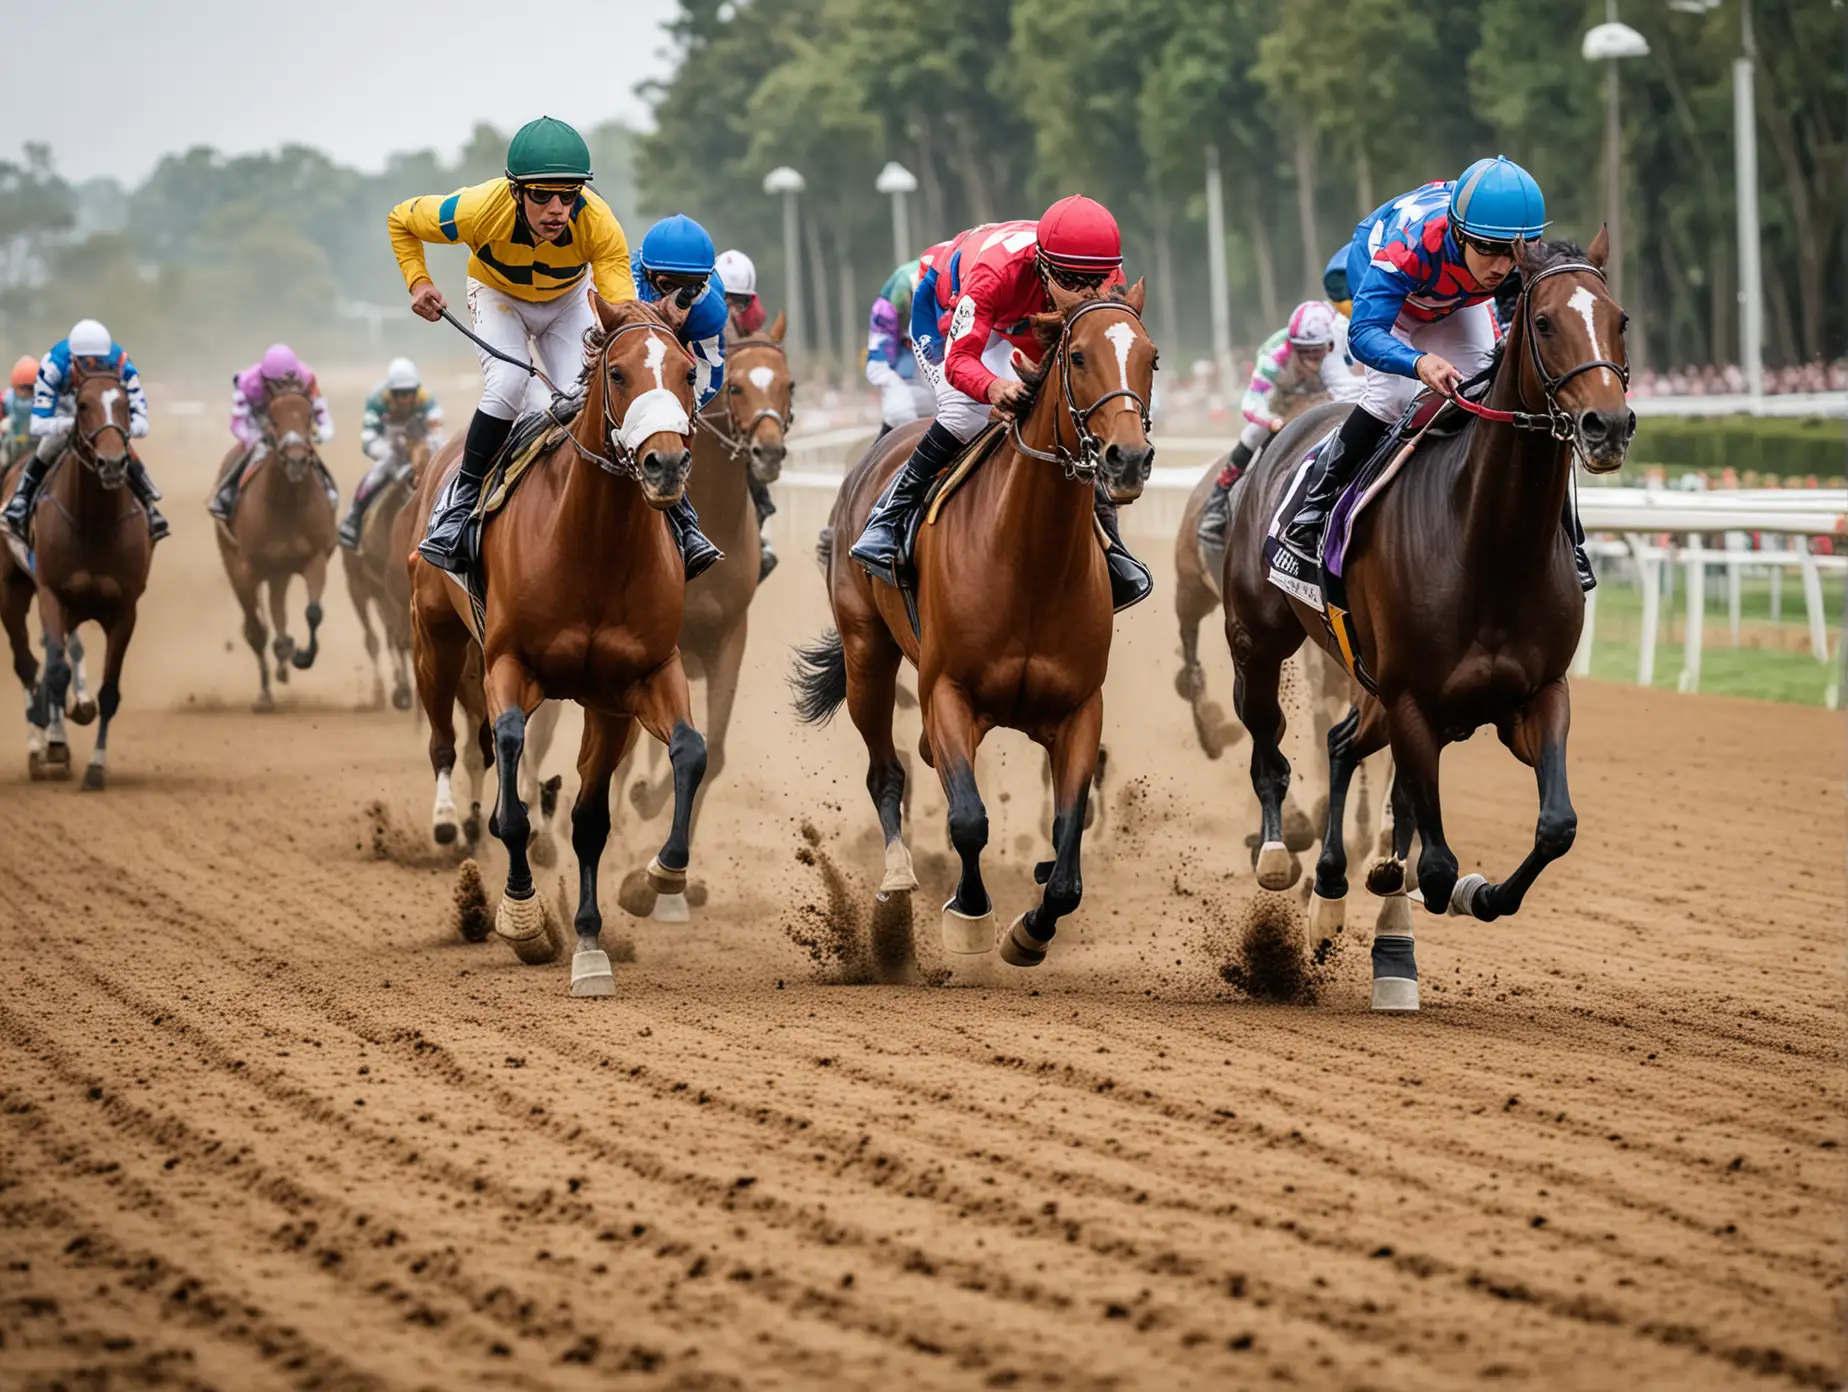 create image of horse racing from an almost ground level perspective coming around the bend showing colorful jockeys expressing their determination